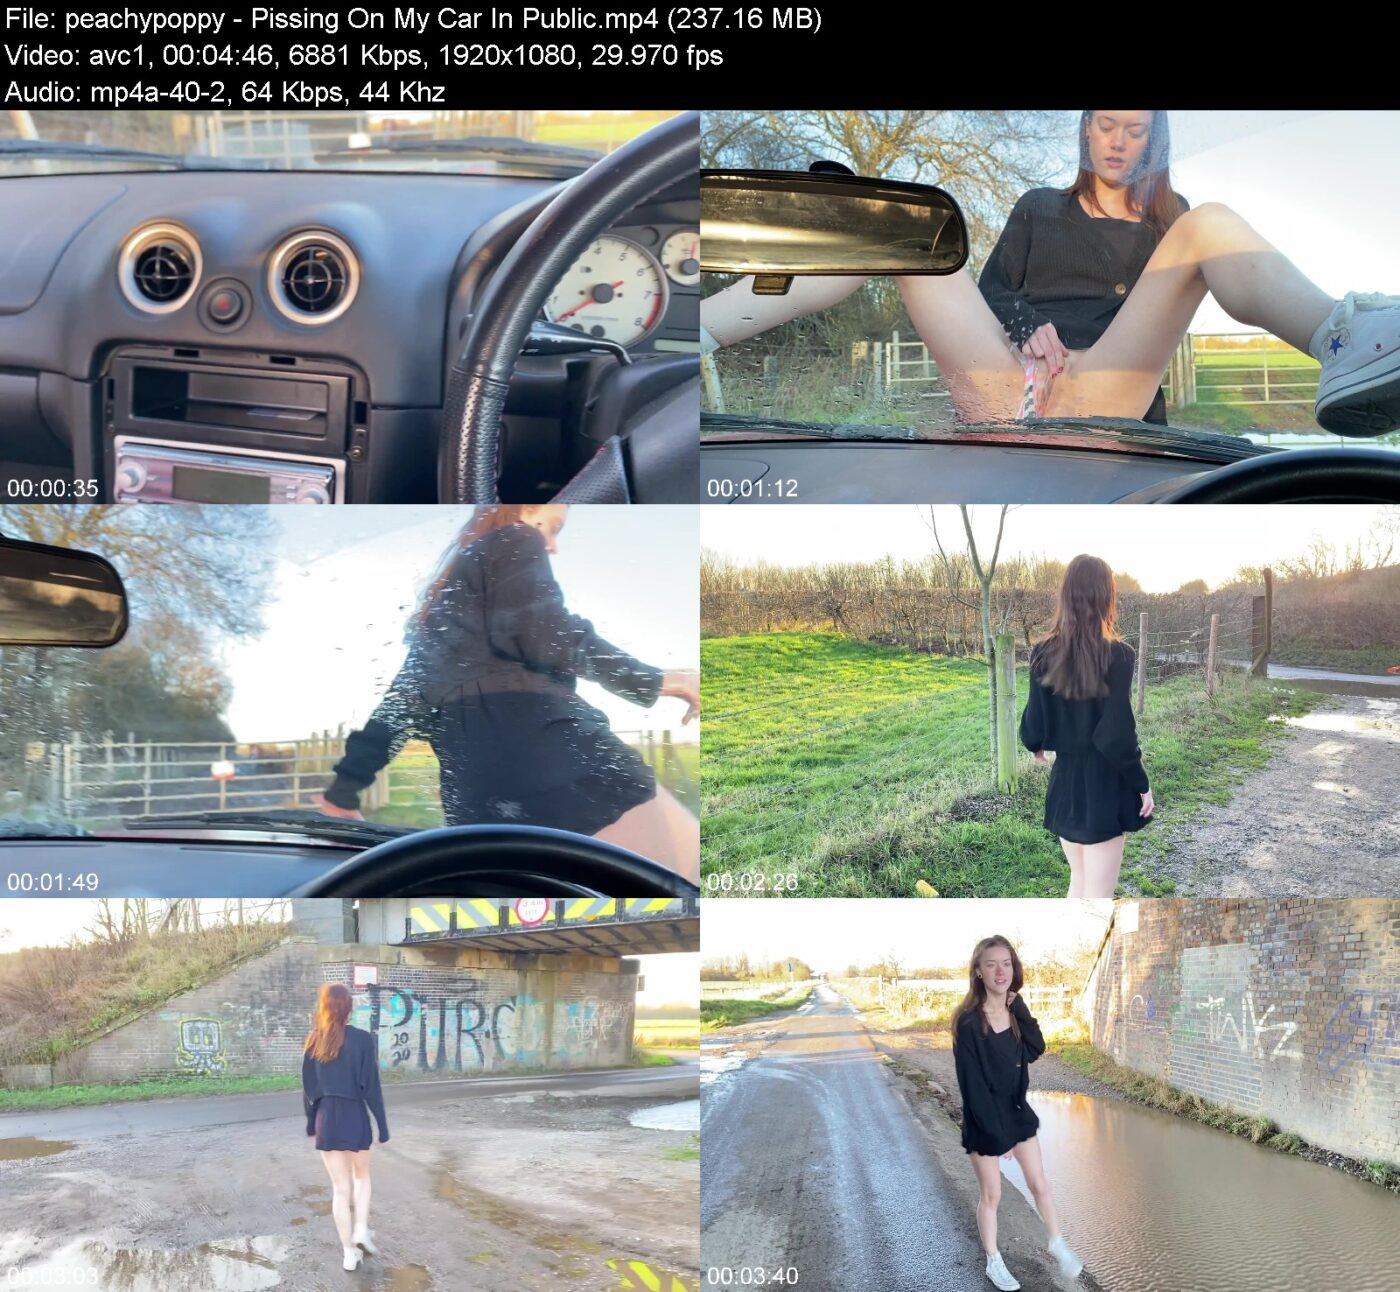 Actress: peachypoppy. Title and Studio: Pissing On My Car In Public